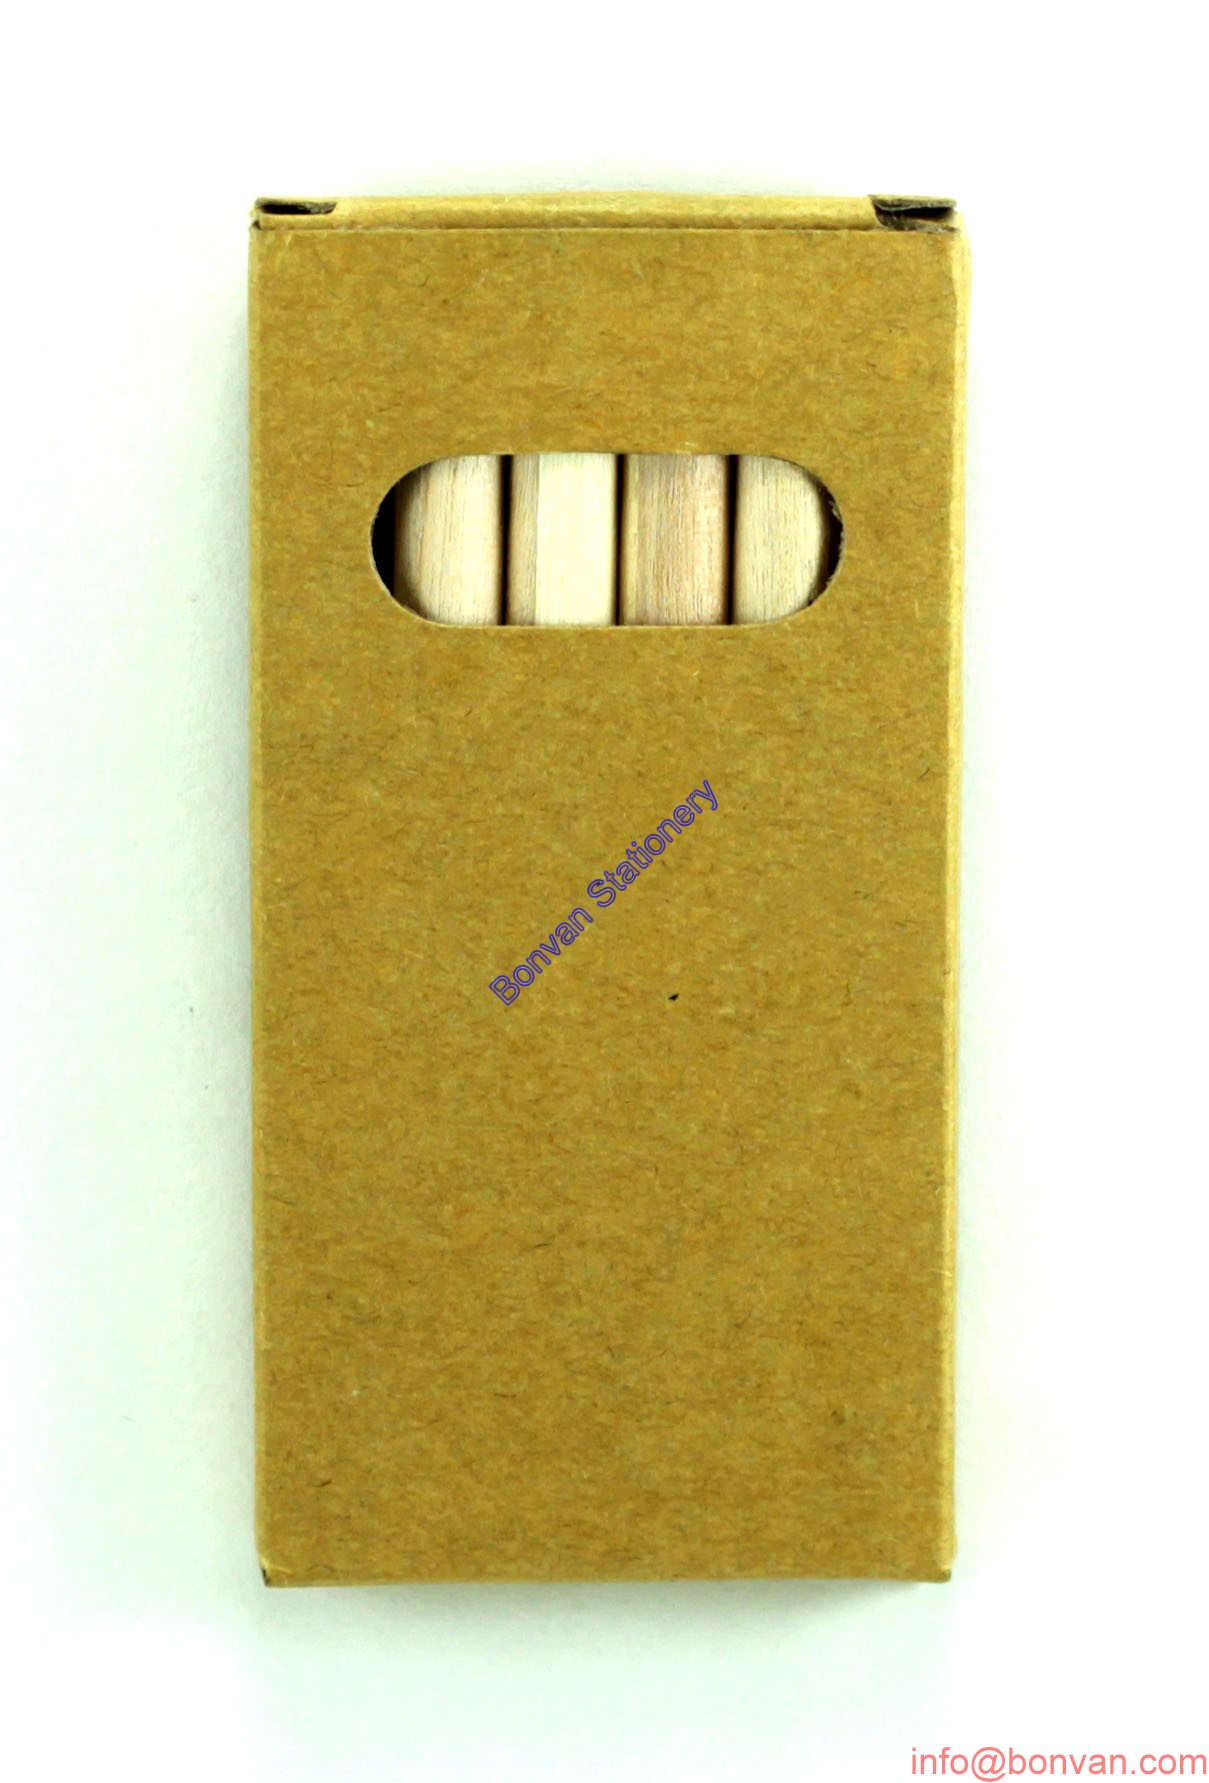 boxed packed wooden pencil,wood pencil